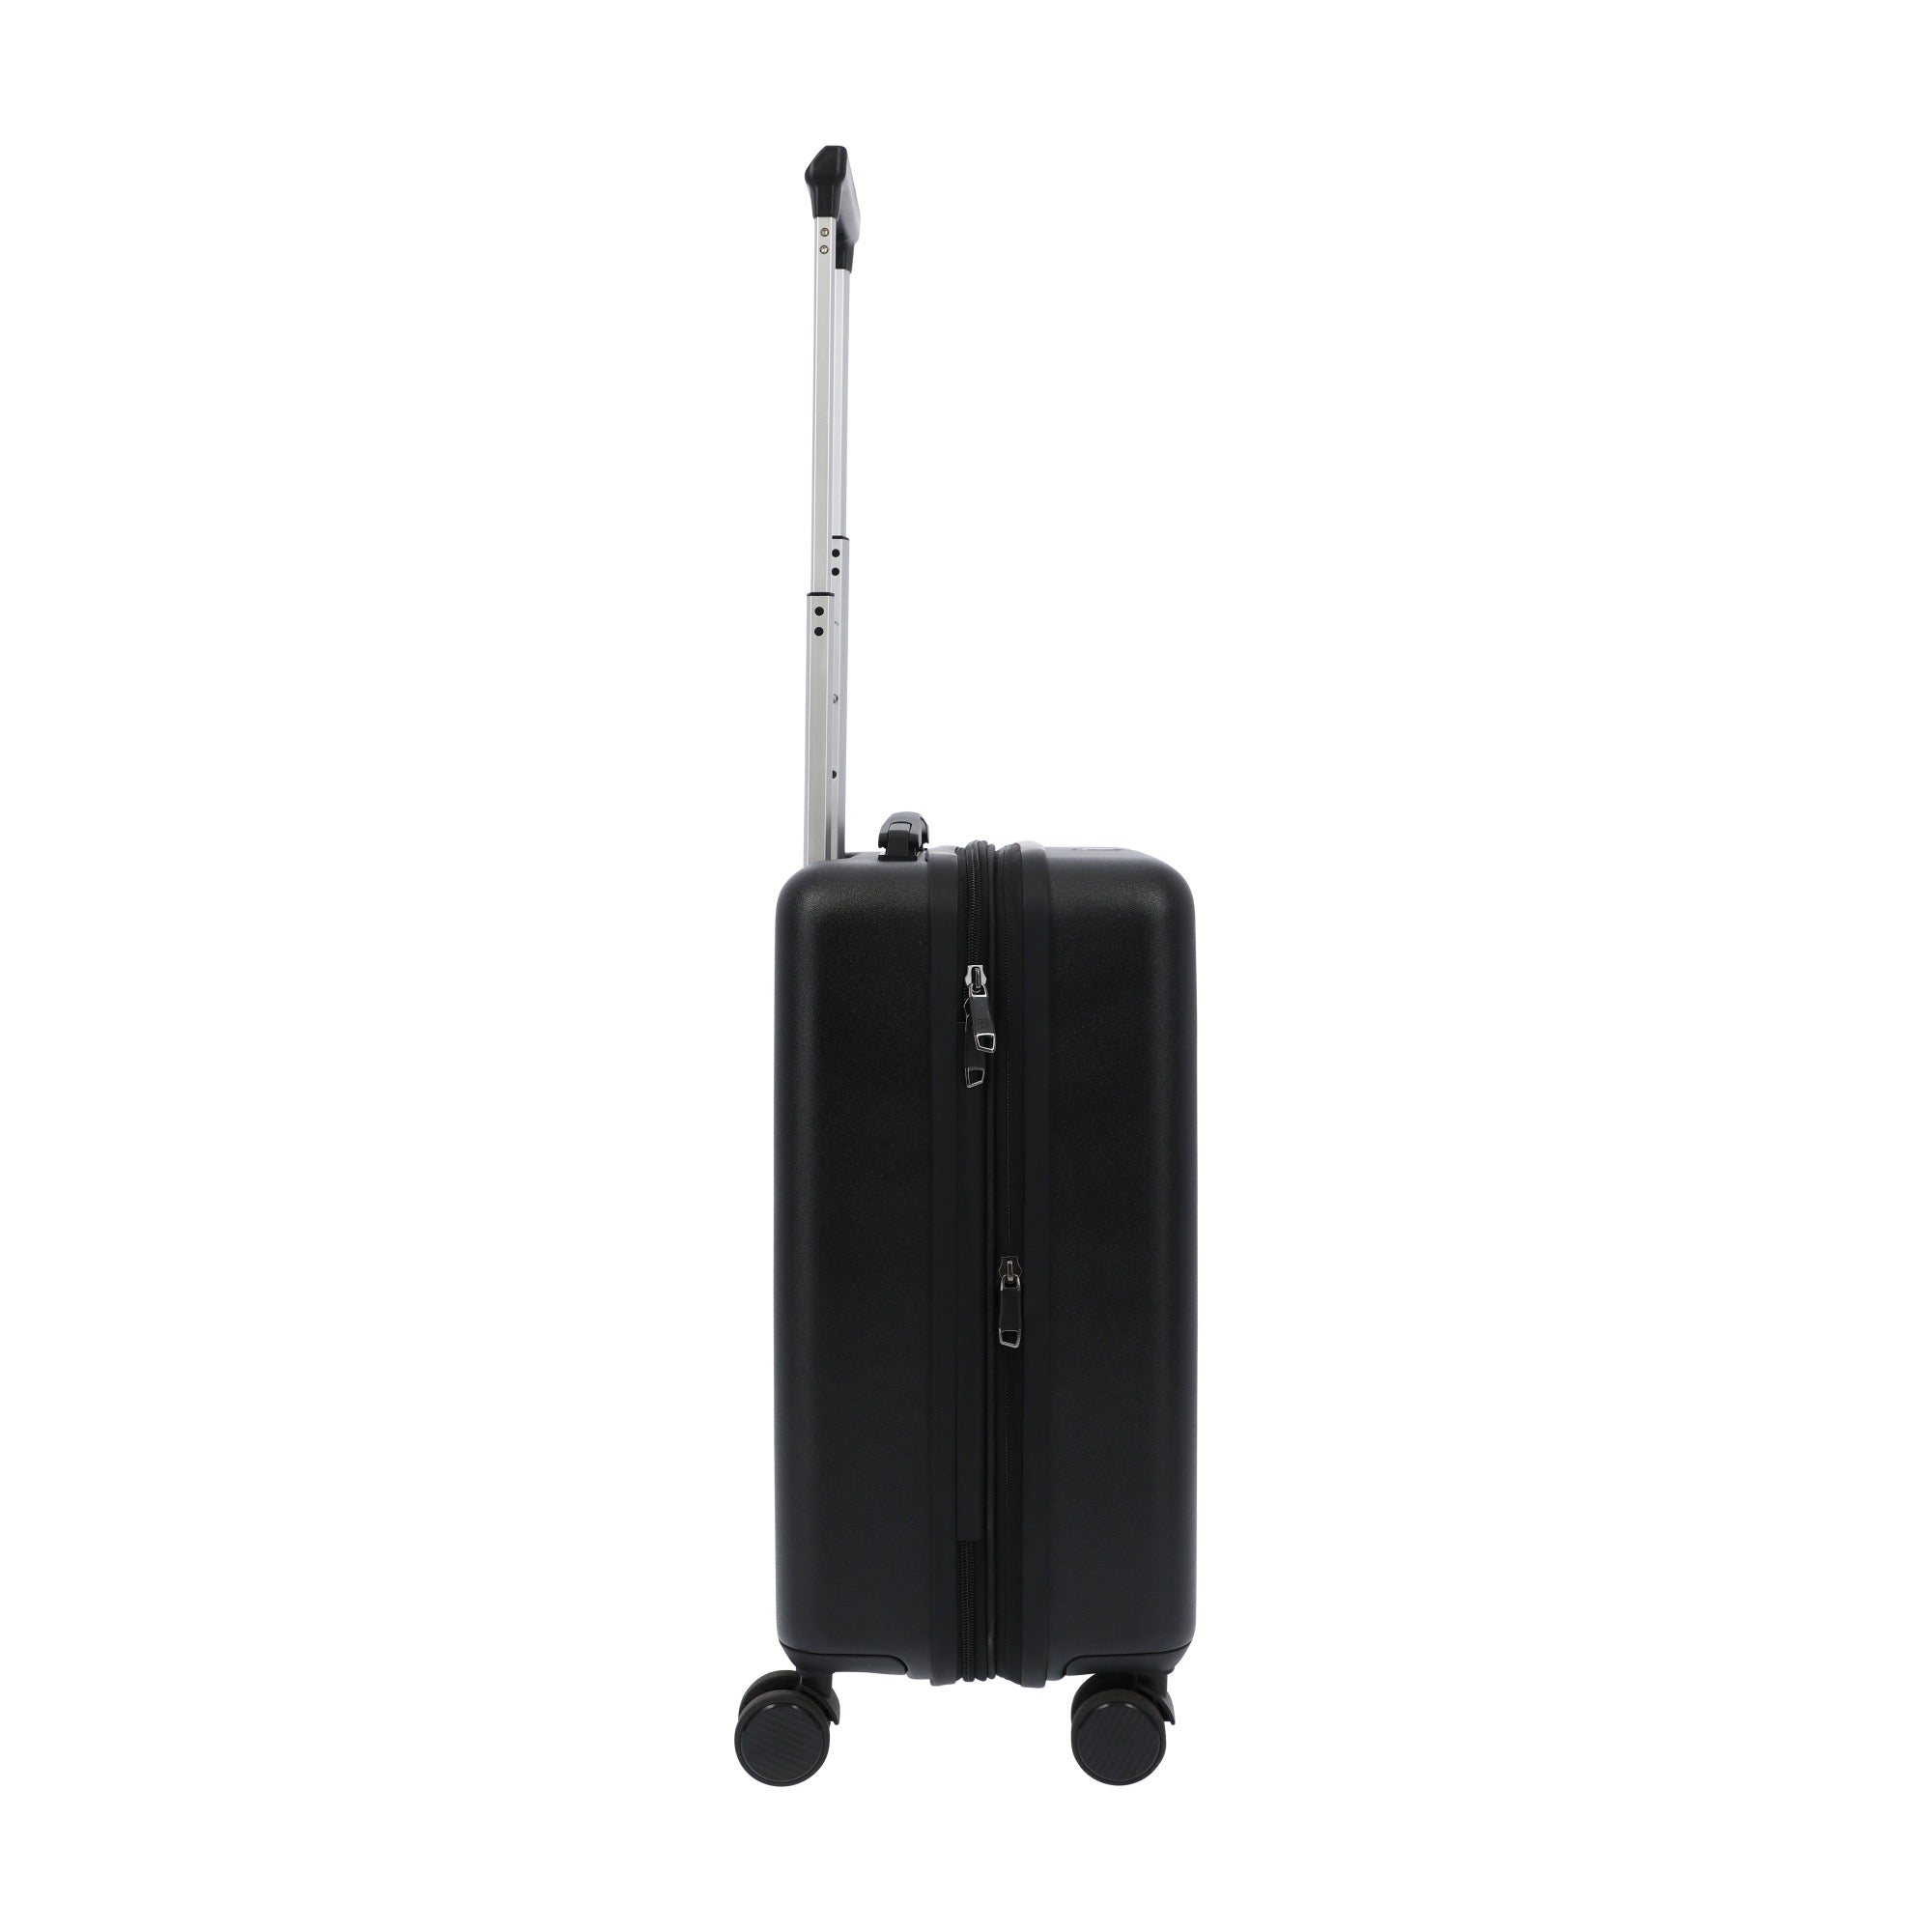 Black 22.5" carry-on spinner suitcase luggage by Ful